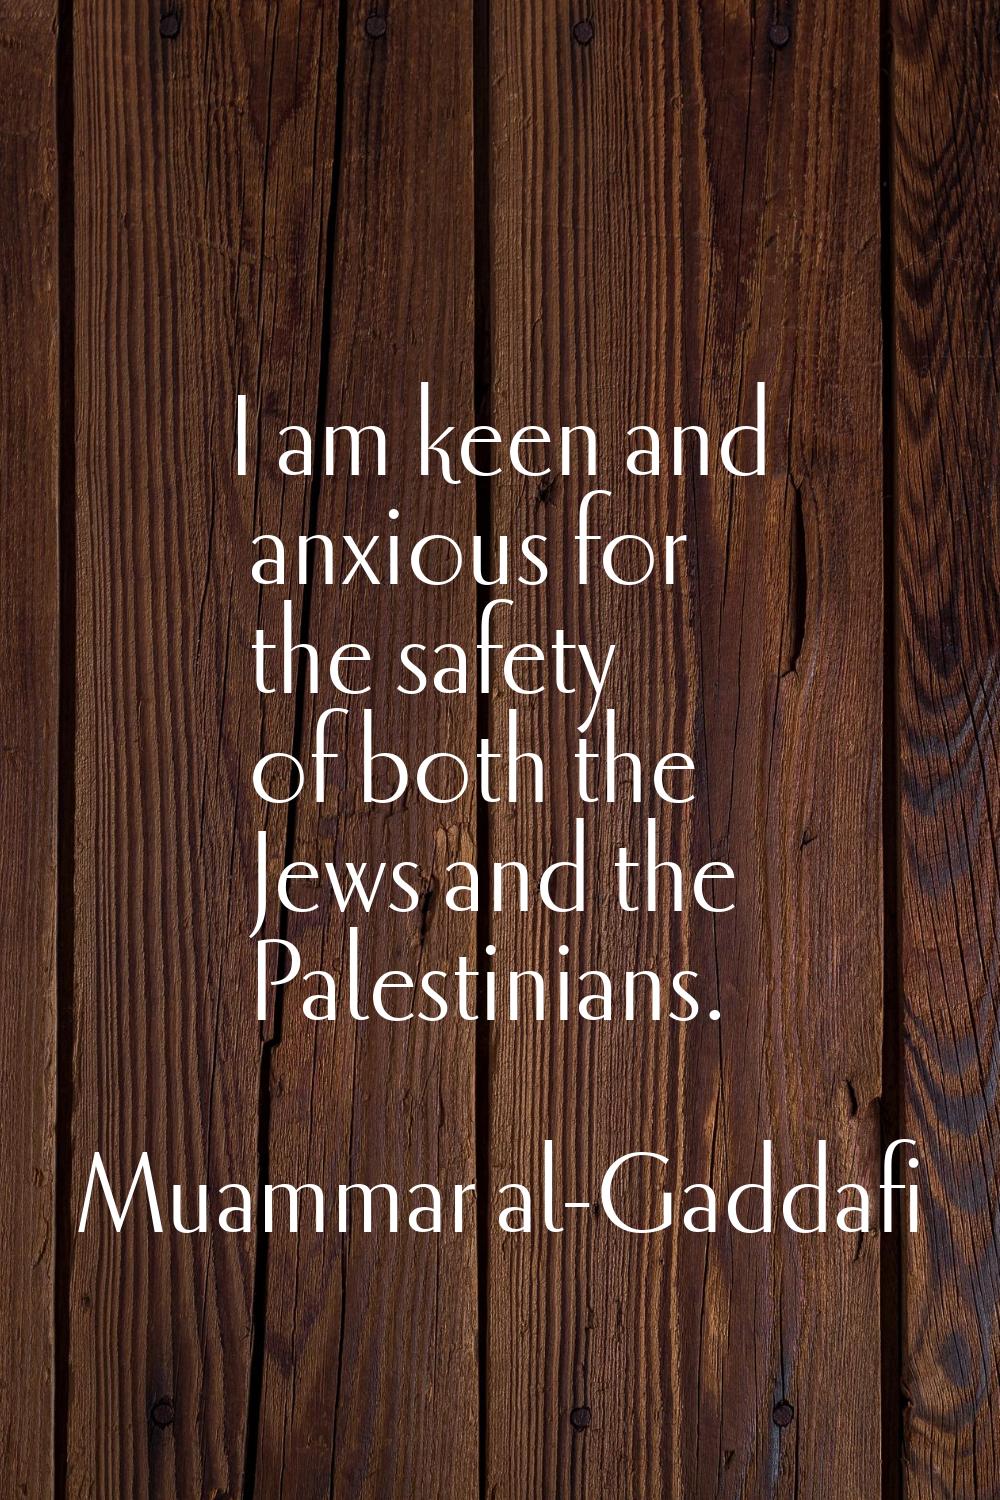 I am keen and anxious for the safety of both the Jews and the Palestinians.